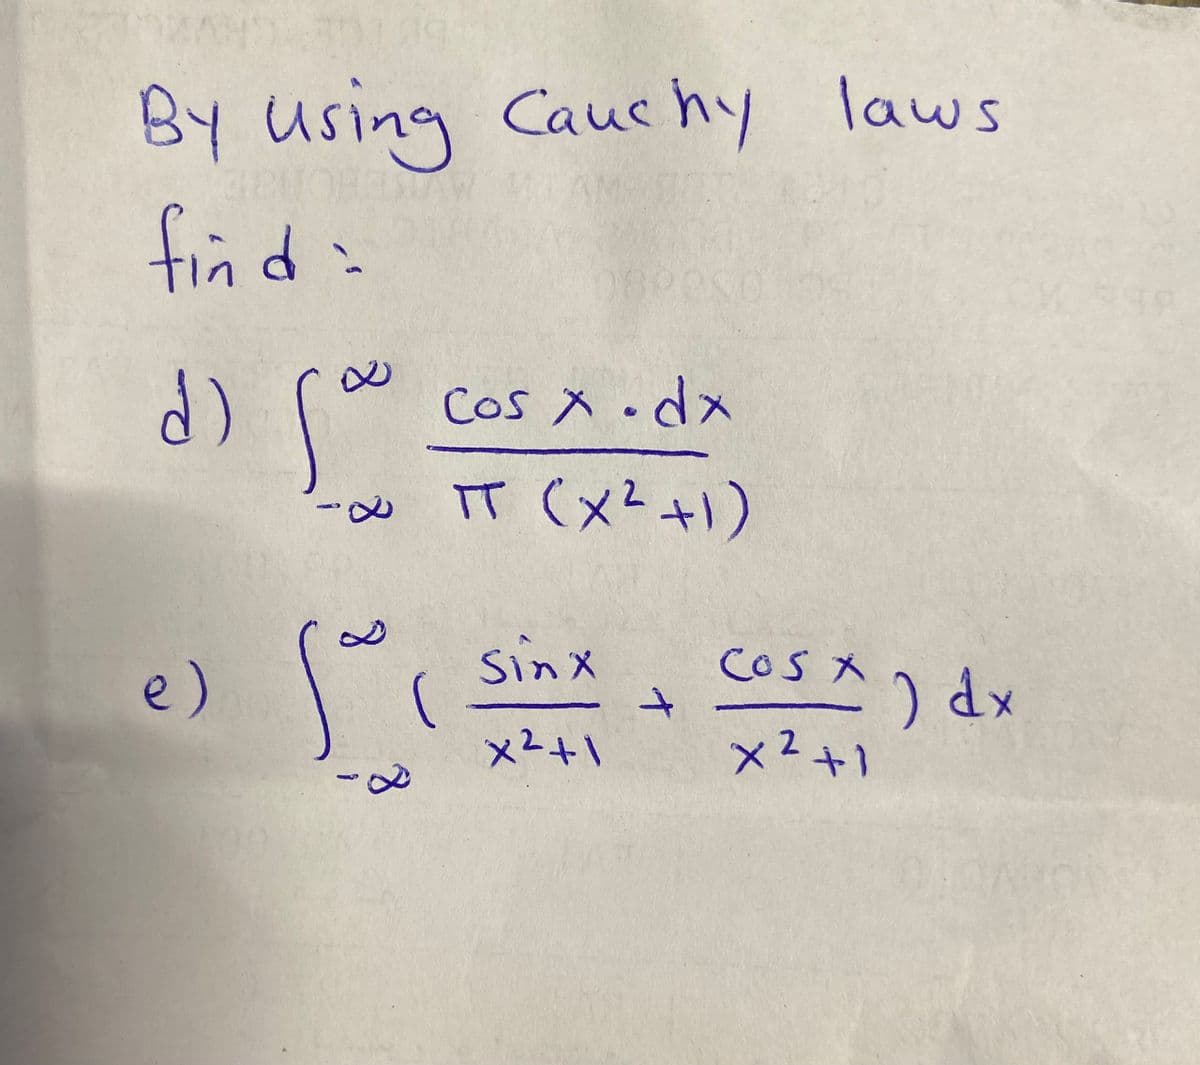 By using Cauchy laws
find>
Cos X odx
T (x²+))
sinx
cosx ) dx
COS A
e)
x2+1
2
イ
